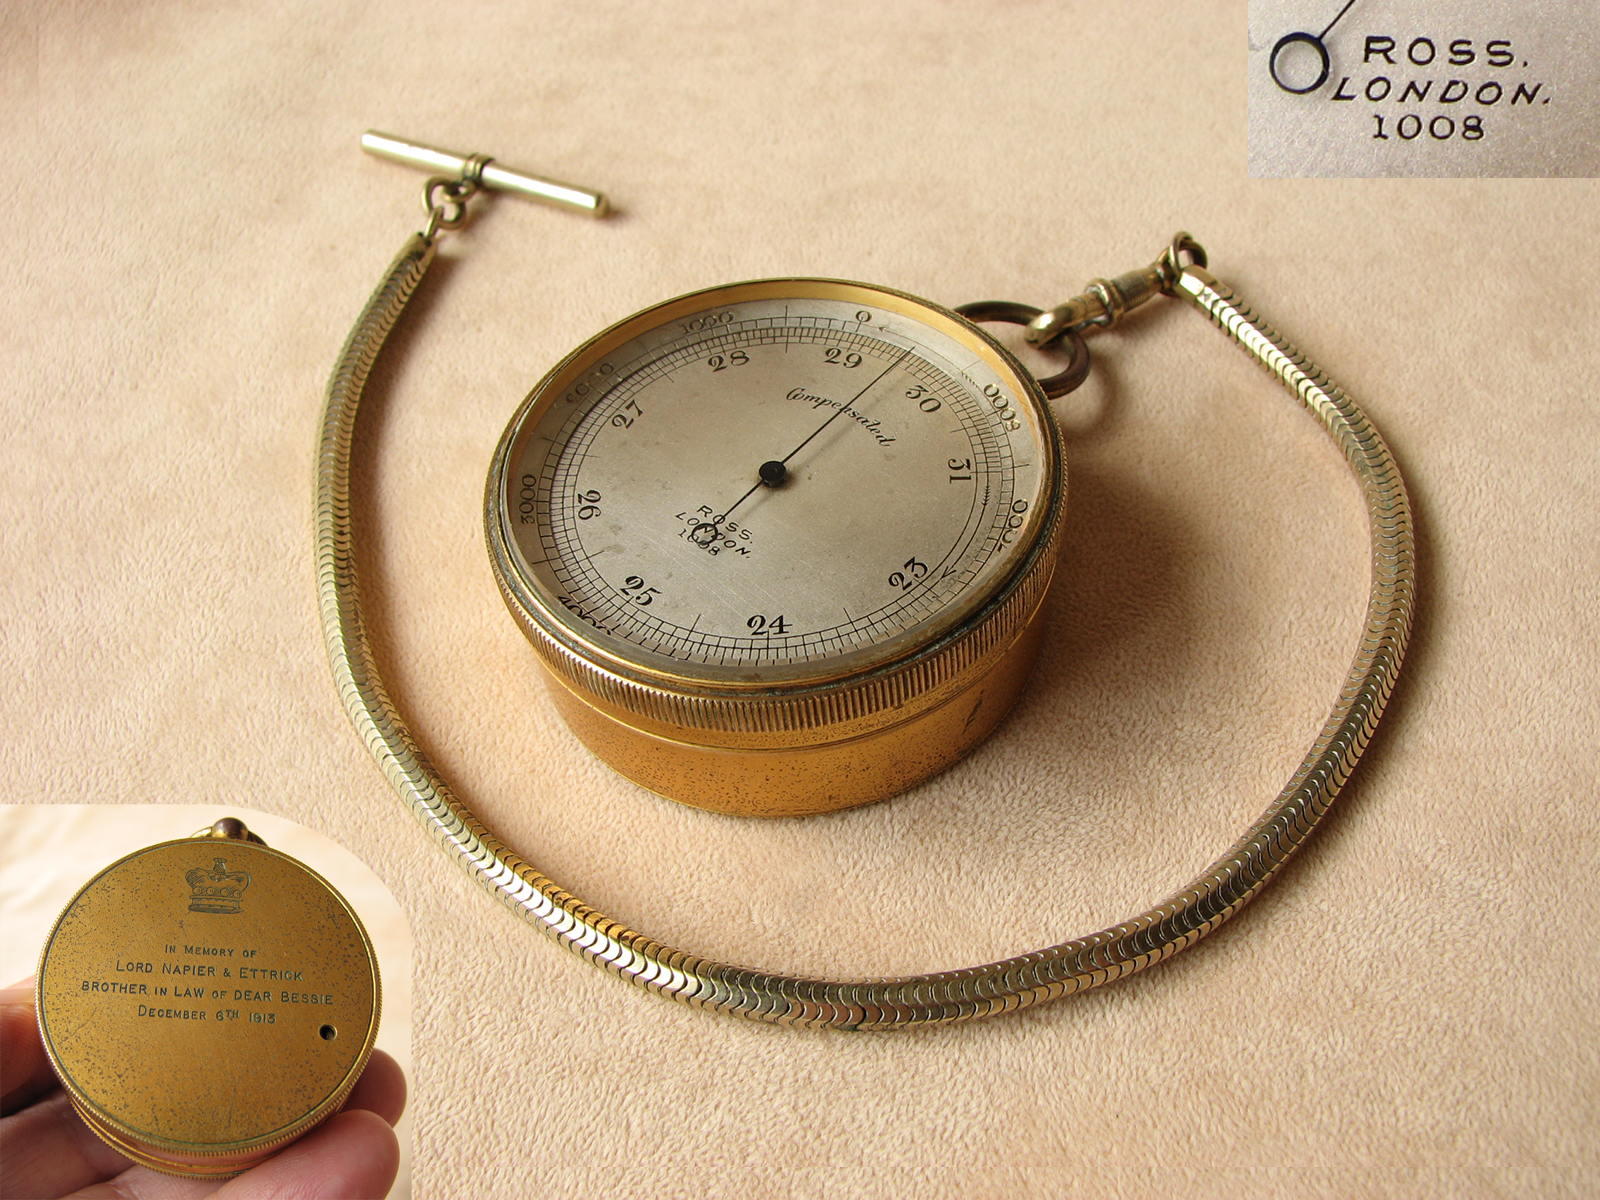 Antique Ross pocket barometer with Lord Napier inscription